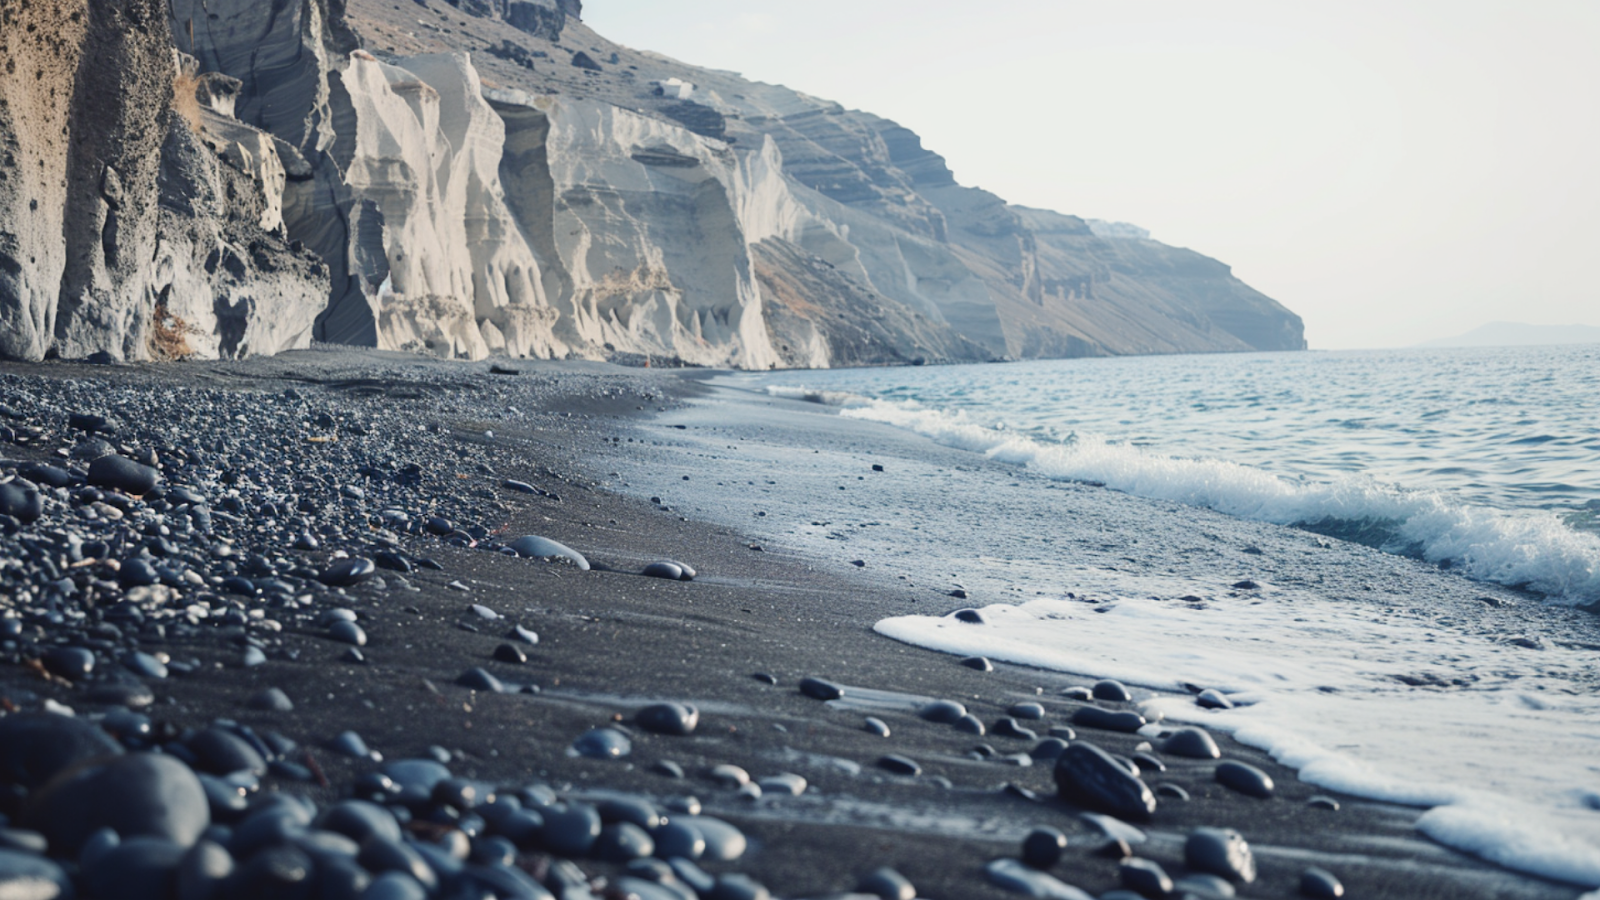 Clear waters crushing against the gray, pebbly sands of a beach in Santorini